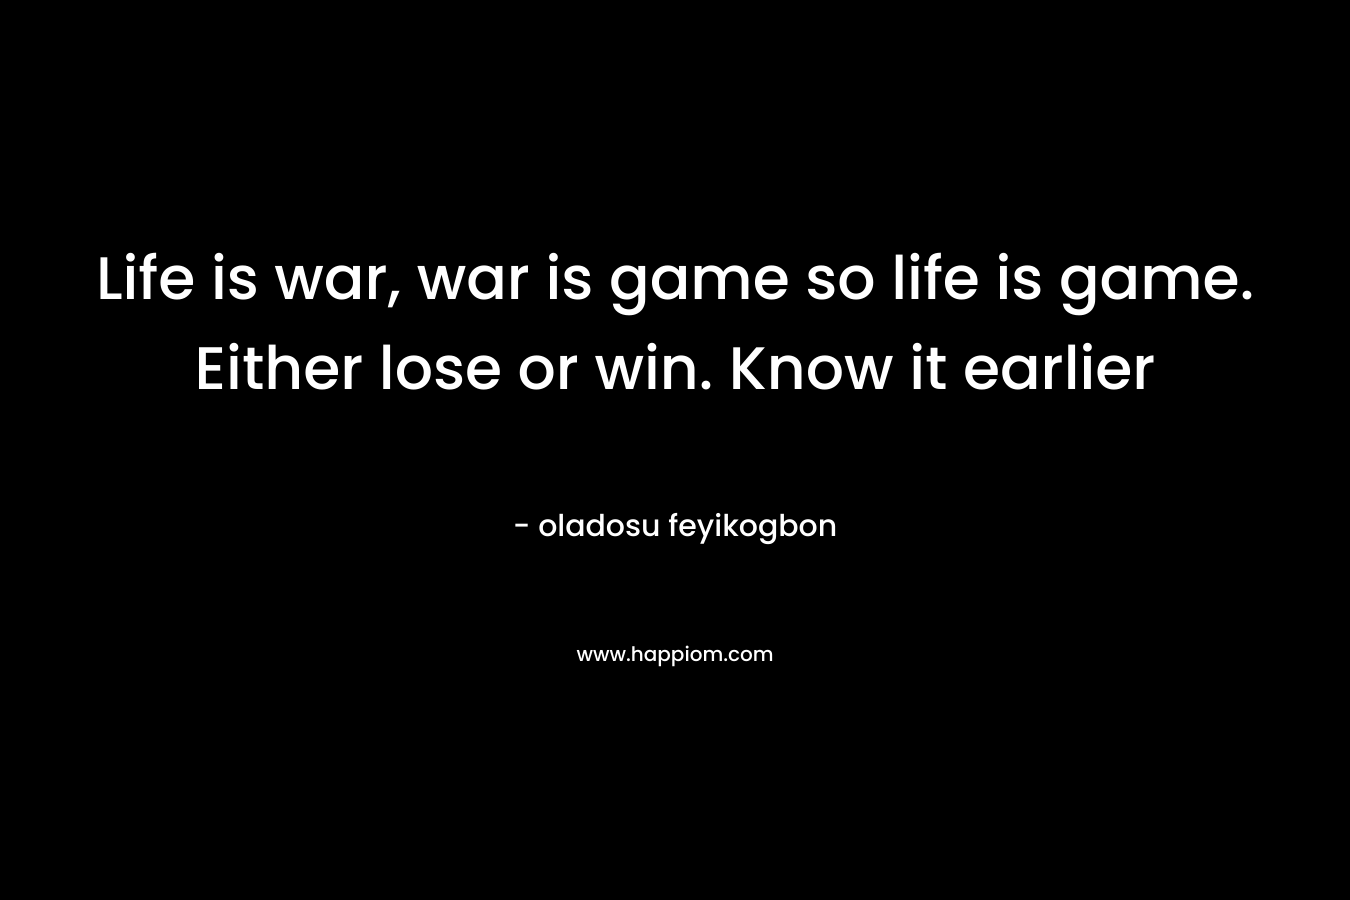 Life is war, war is game so life is game. Either lose or win. Know it earlier